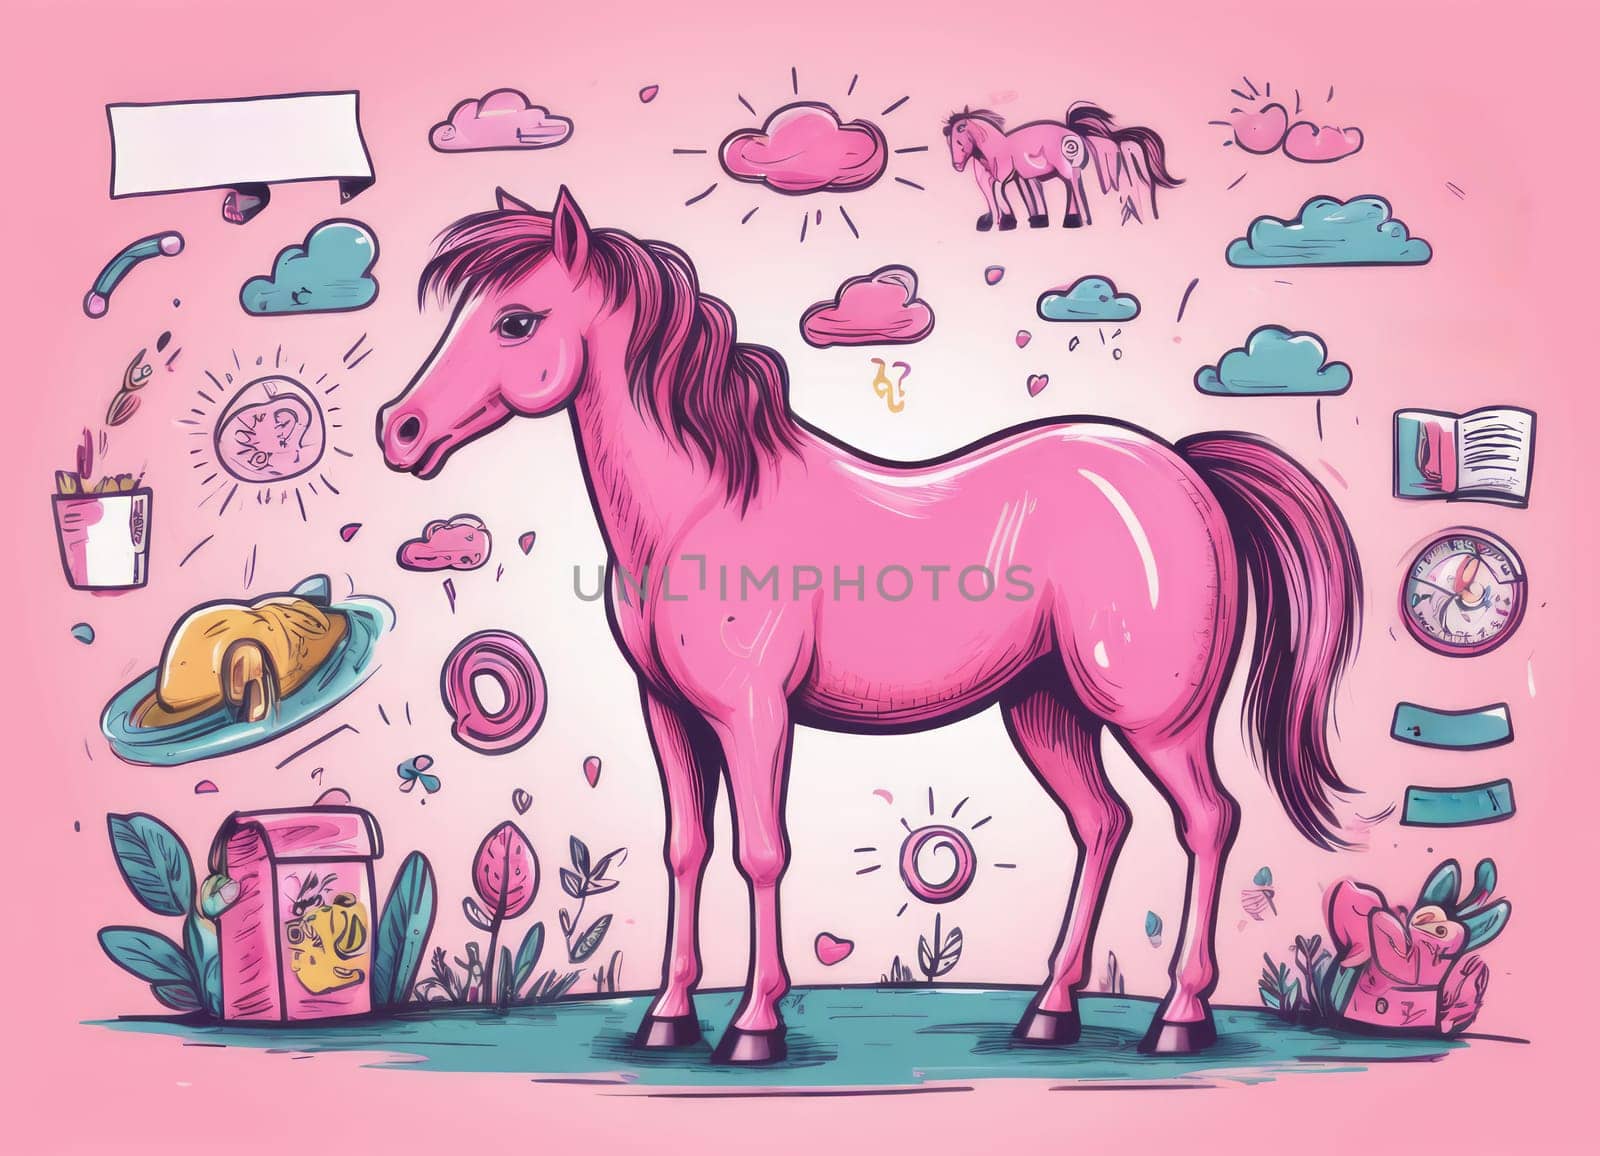 A whimsical and artistic image of a pink horse surrounded by various objects creating an eclectic and abstract theme. The image is set against a pink background that complements the color scheme of the illustration.